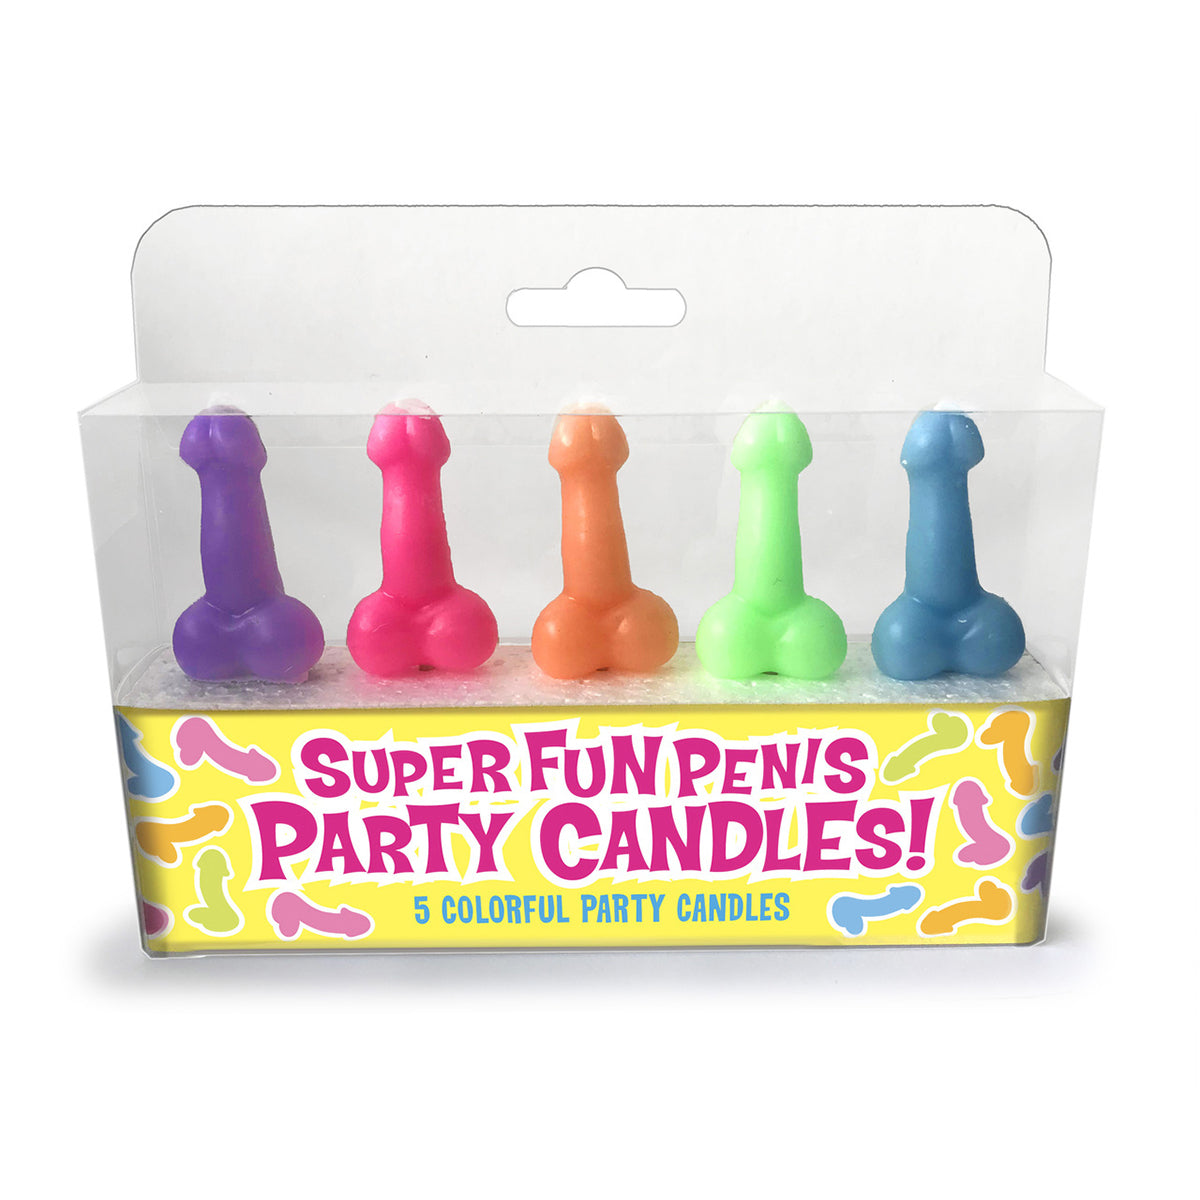 Candyprints Super Fun Penis Party Candles - 5 pack